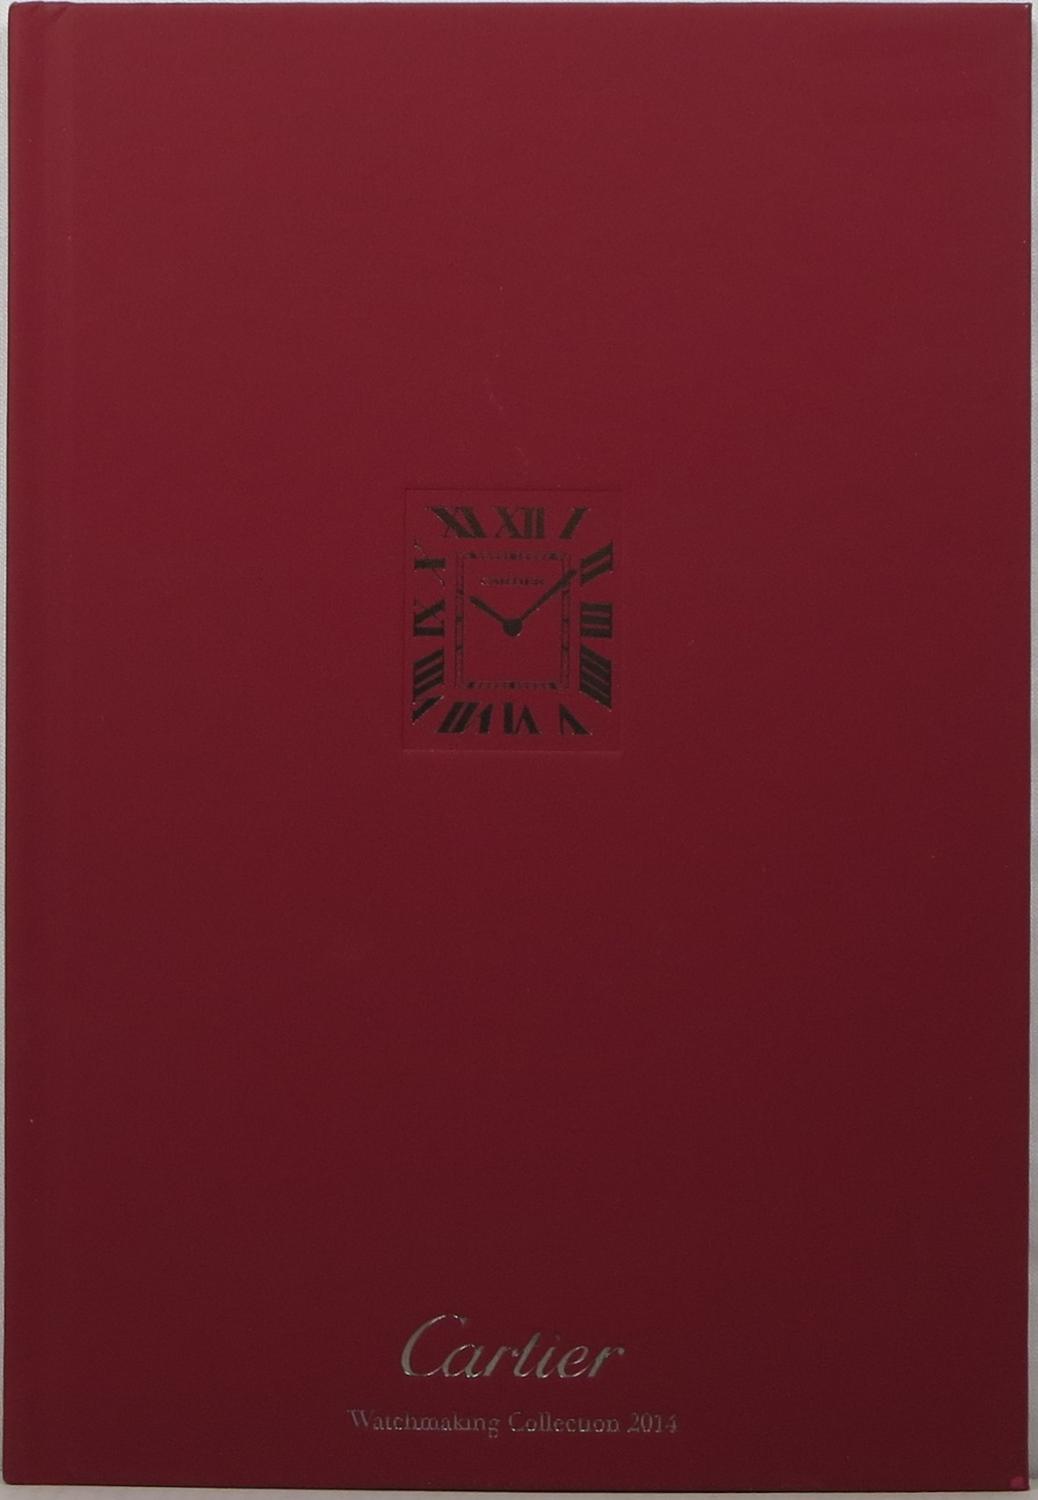 Cartier Watchmaking Collection 2014 by 